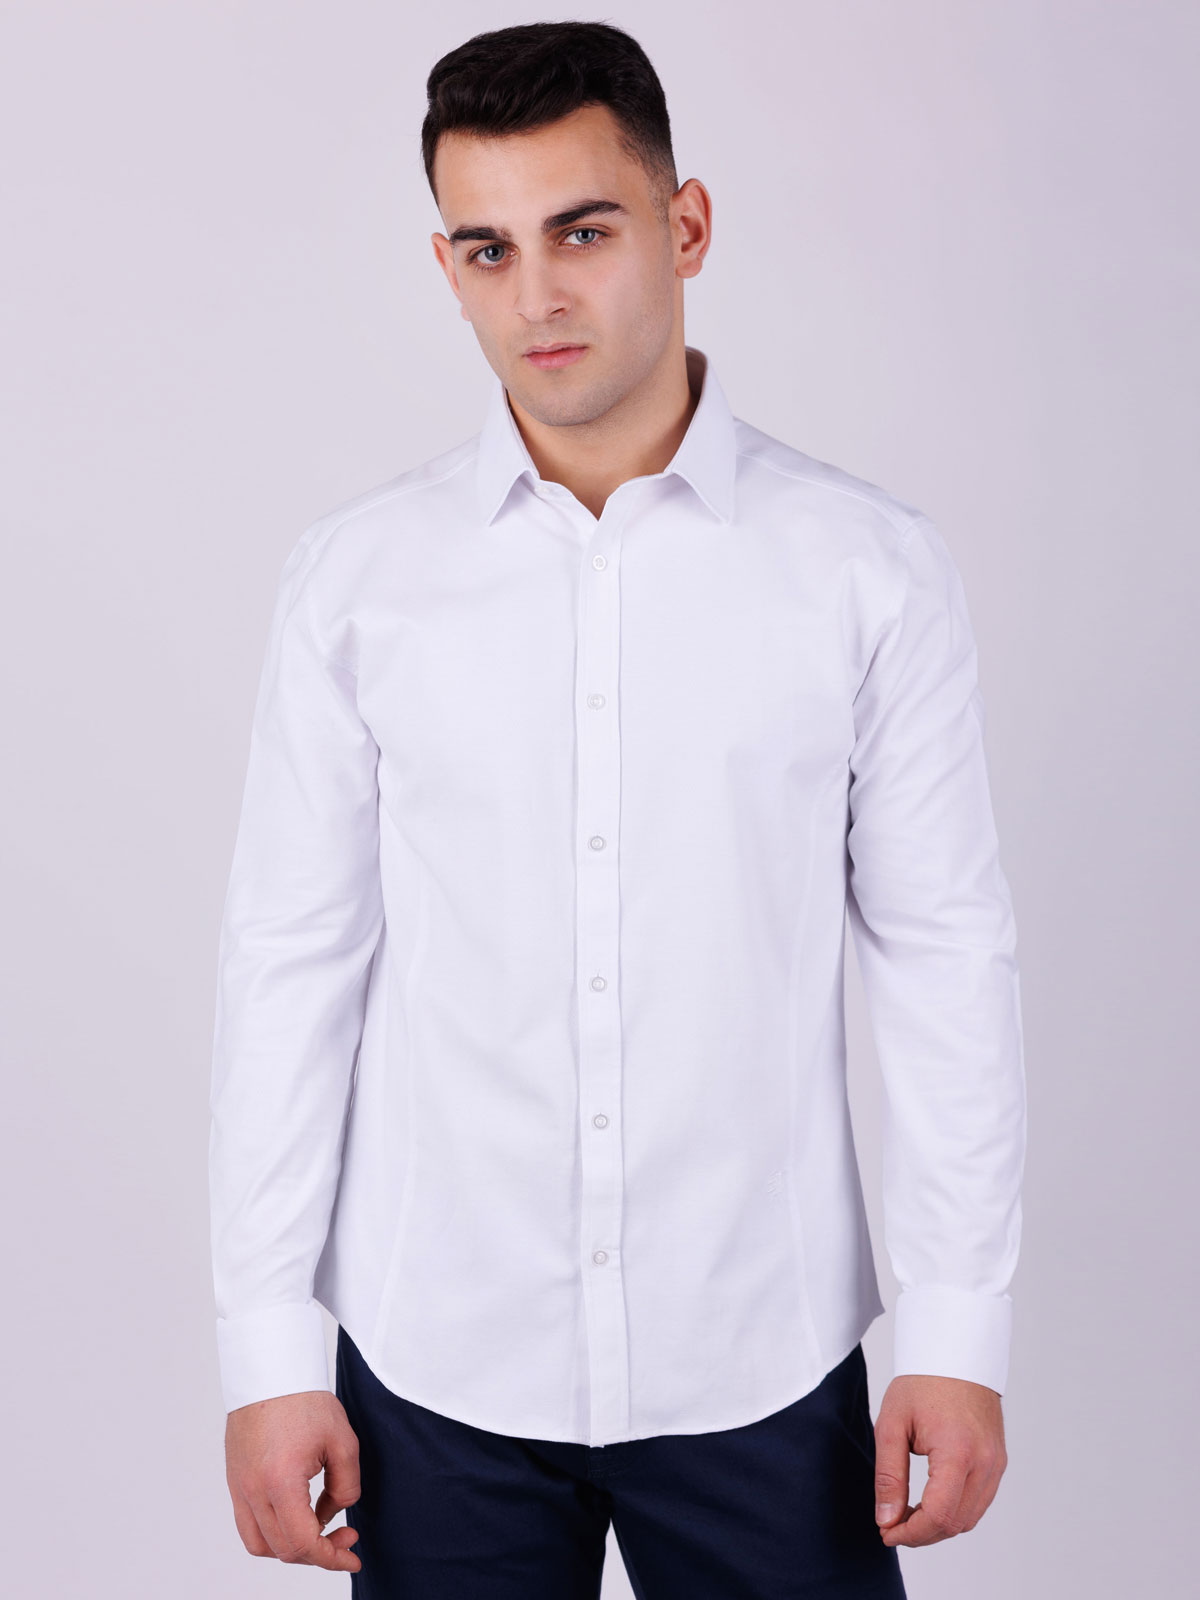 White shirt with striped relief - 21539 € 48.37 img3